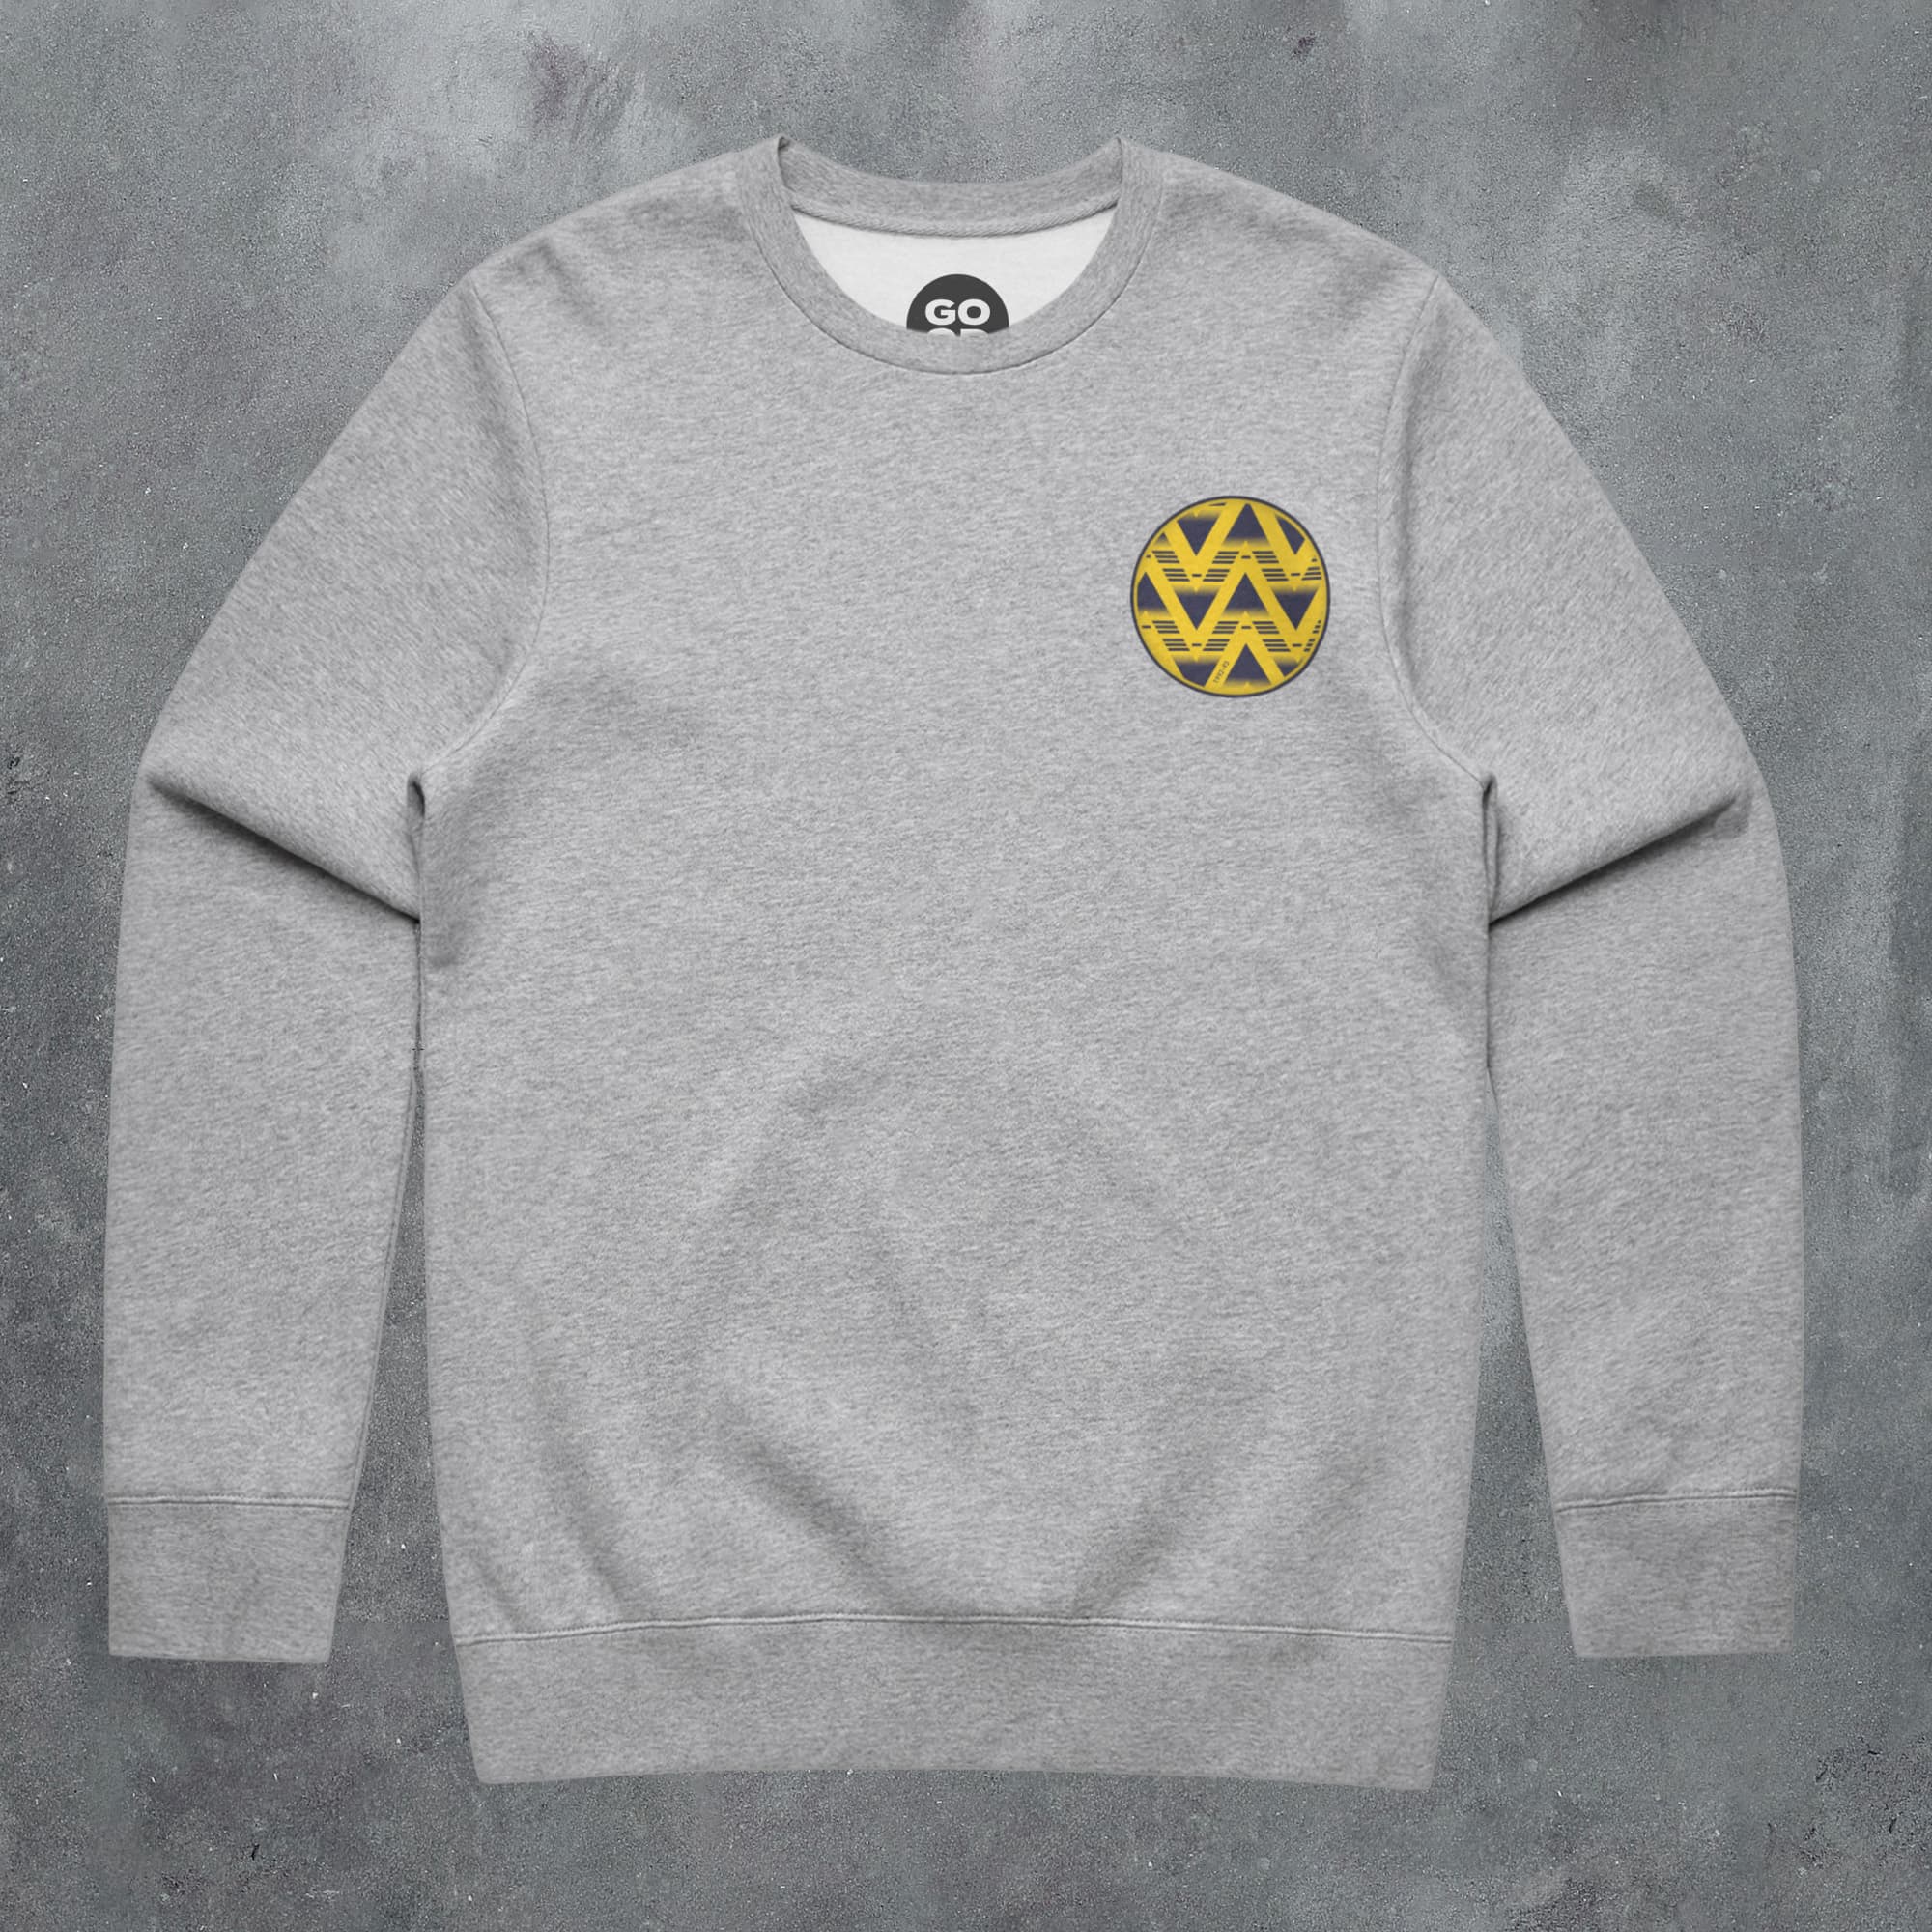 a grey sweatshirt with a yellow and black logo on it